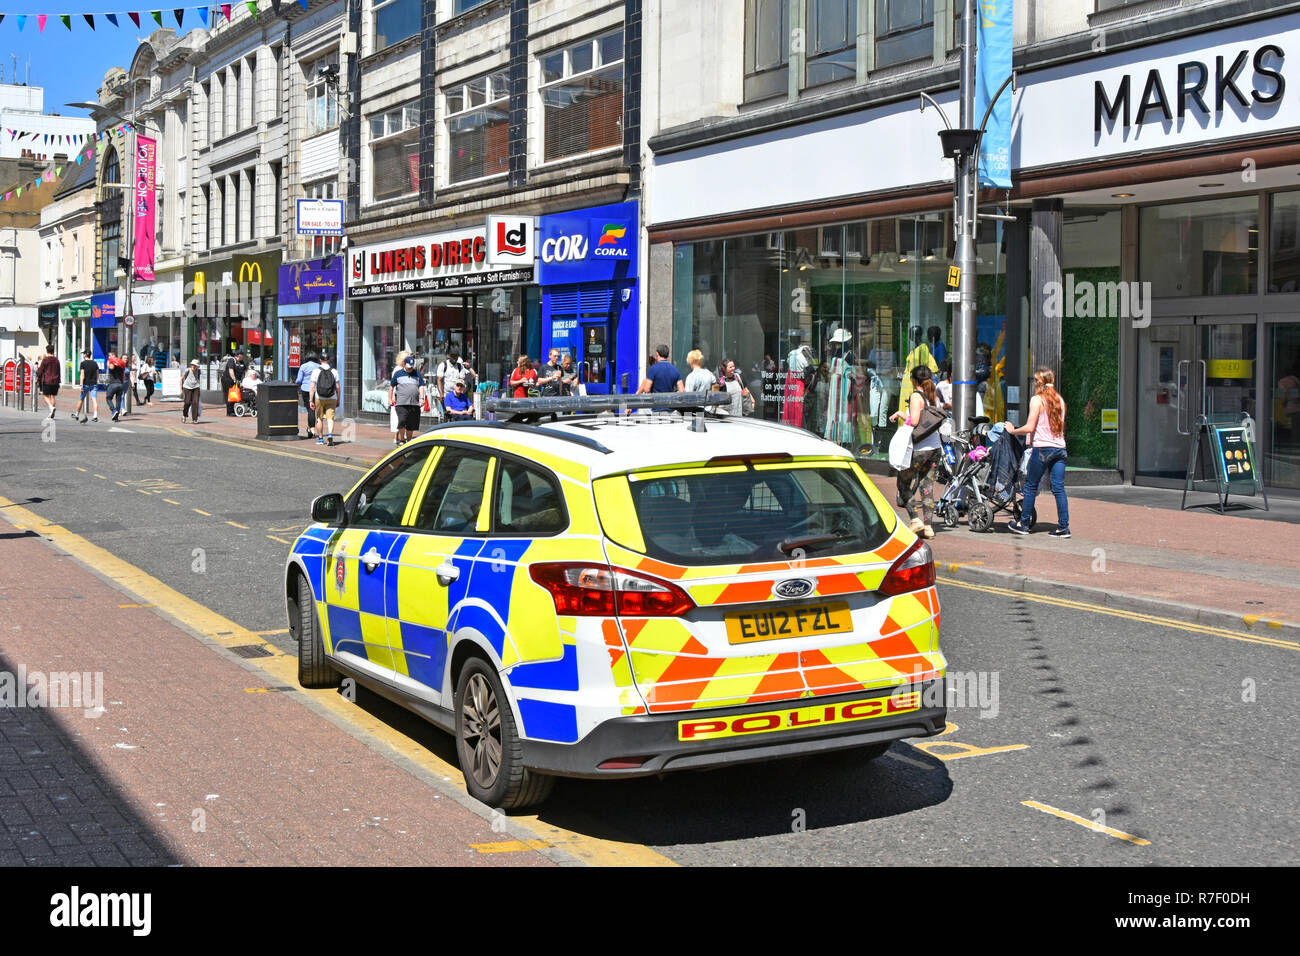 Southend on sea street scene in holiday seaside resort Essex Ford police car & battenburg markings town centre shopping high street Essex England UK Stock Photo